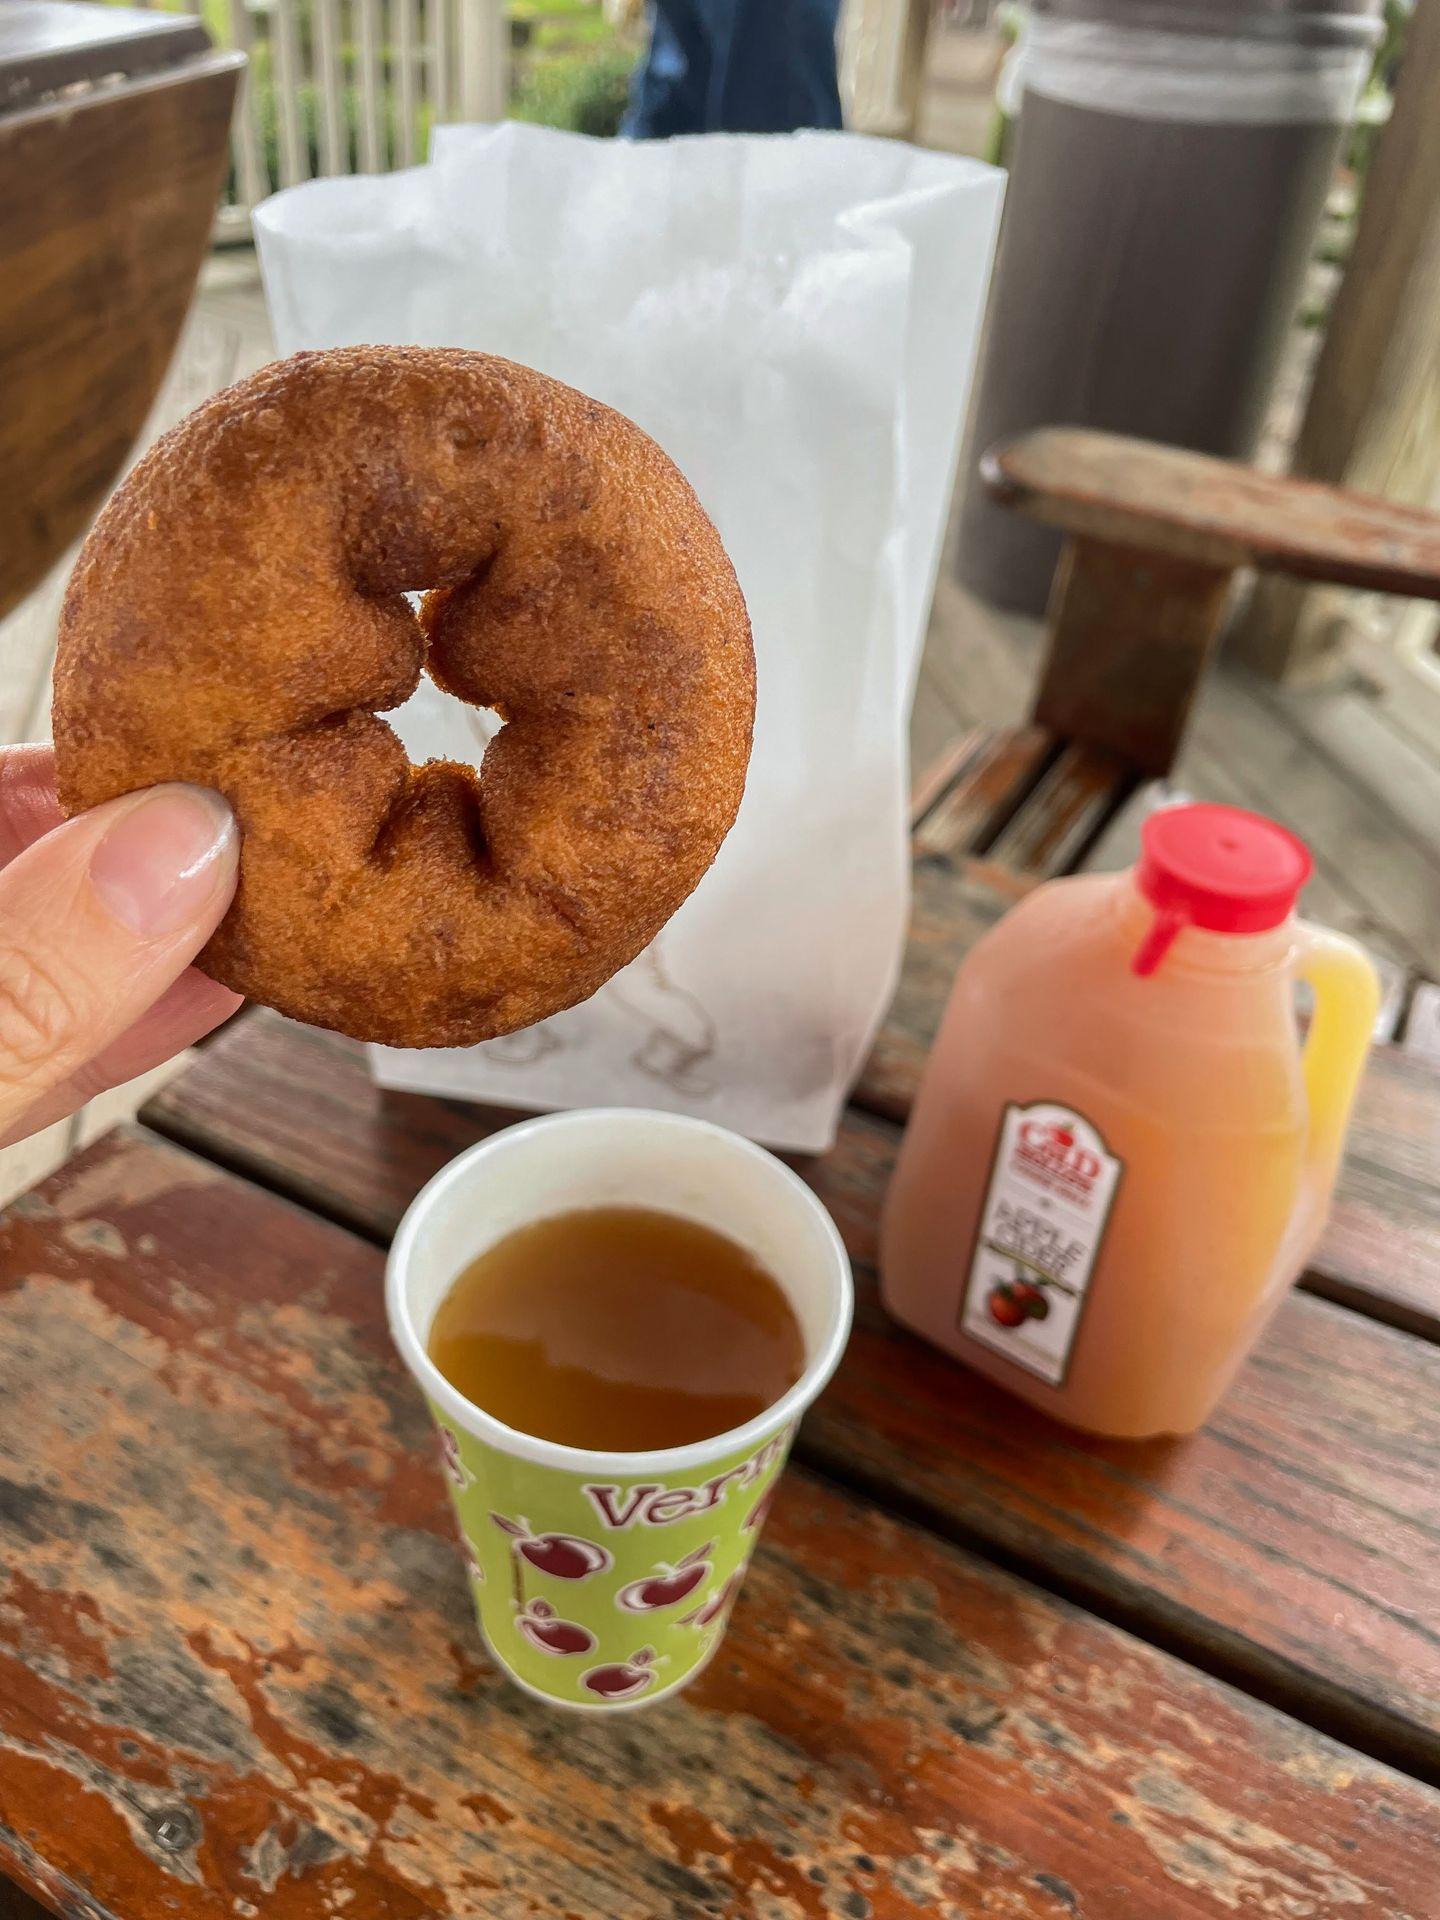 Holding up an apple cider donut next to a cup of hot apple cider.